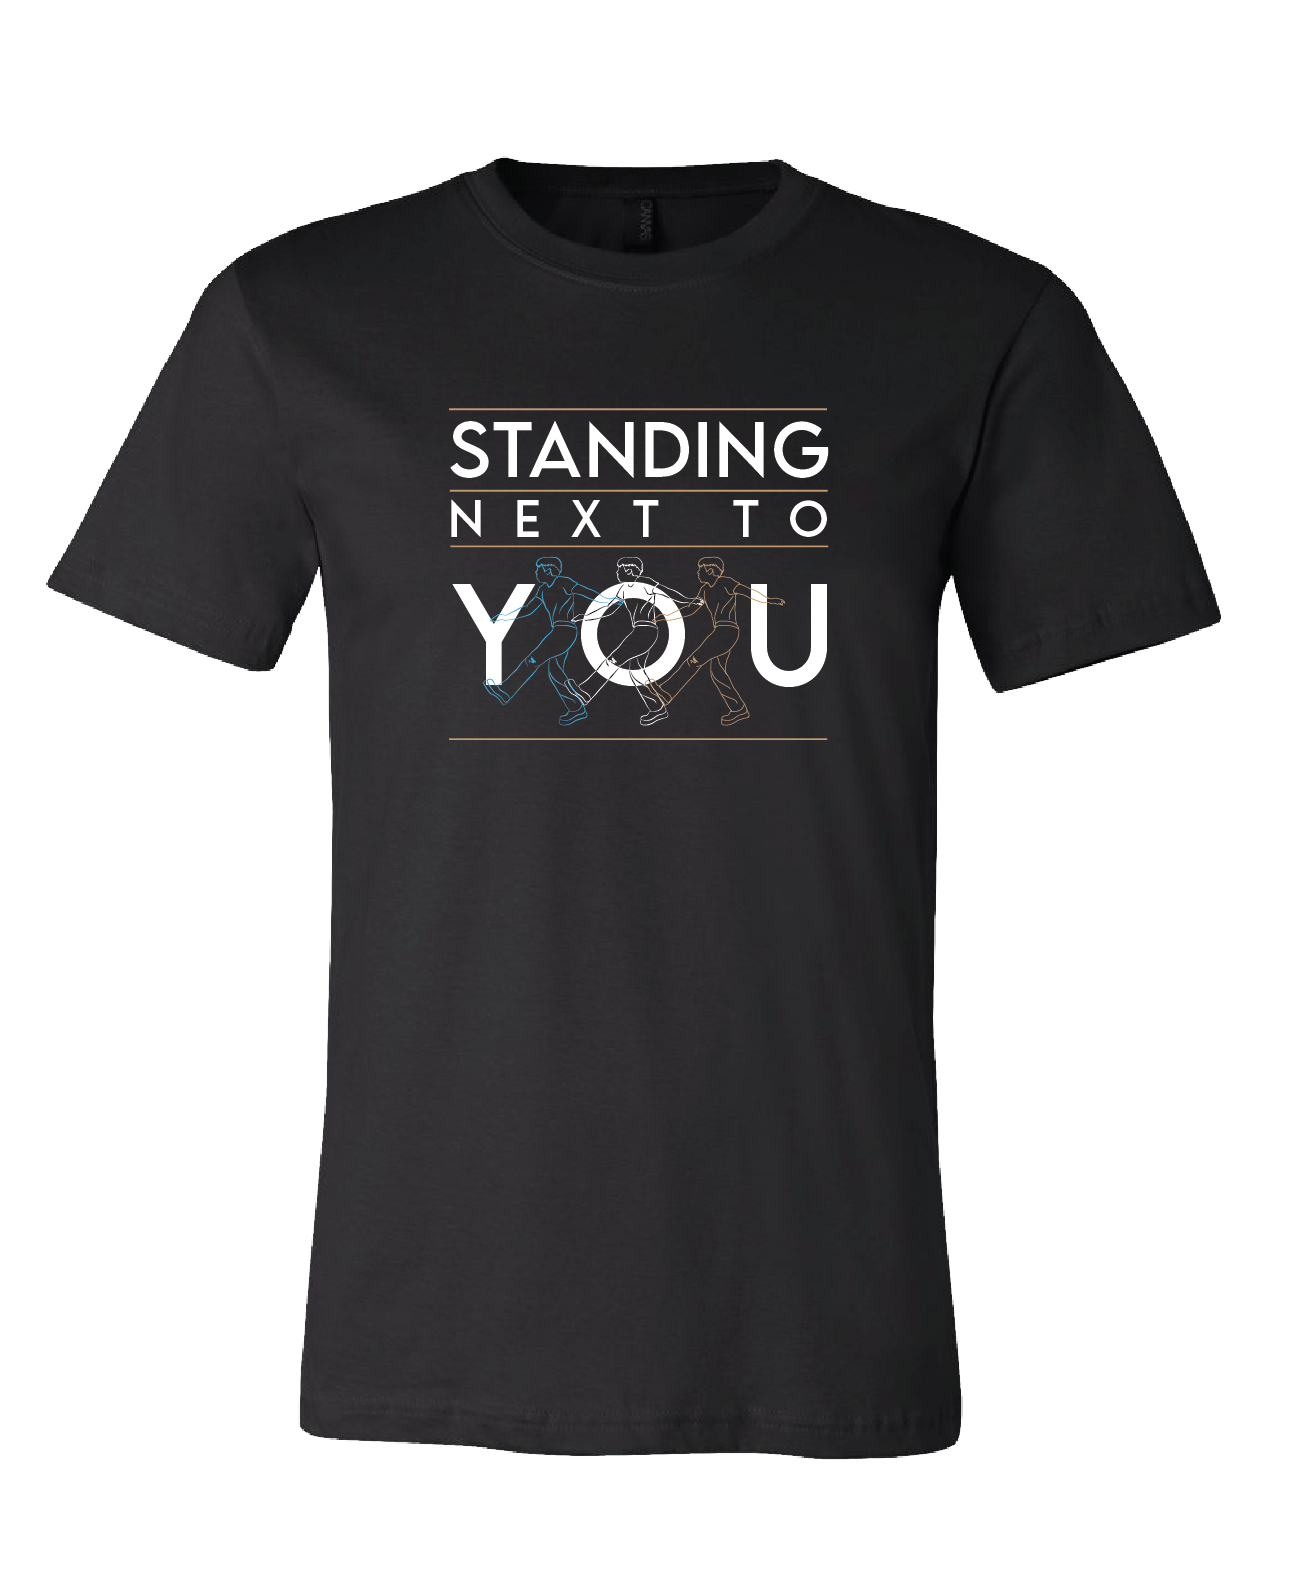 Tshirt - Standing Next to You